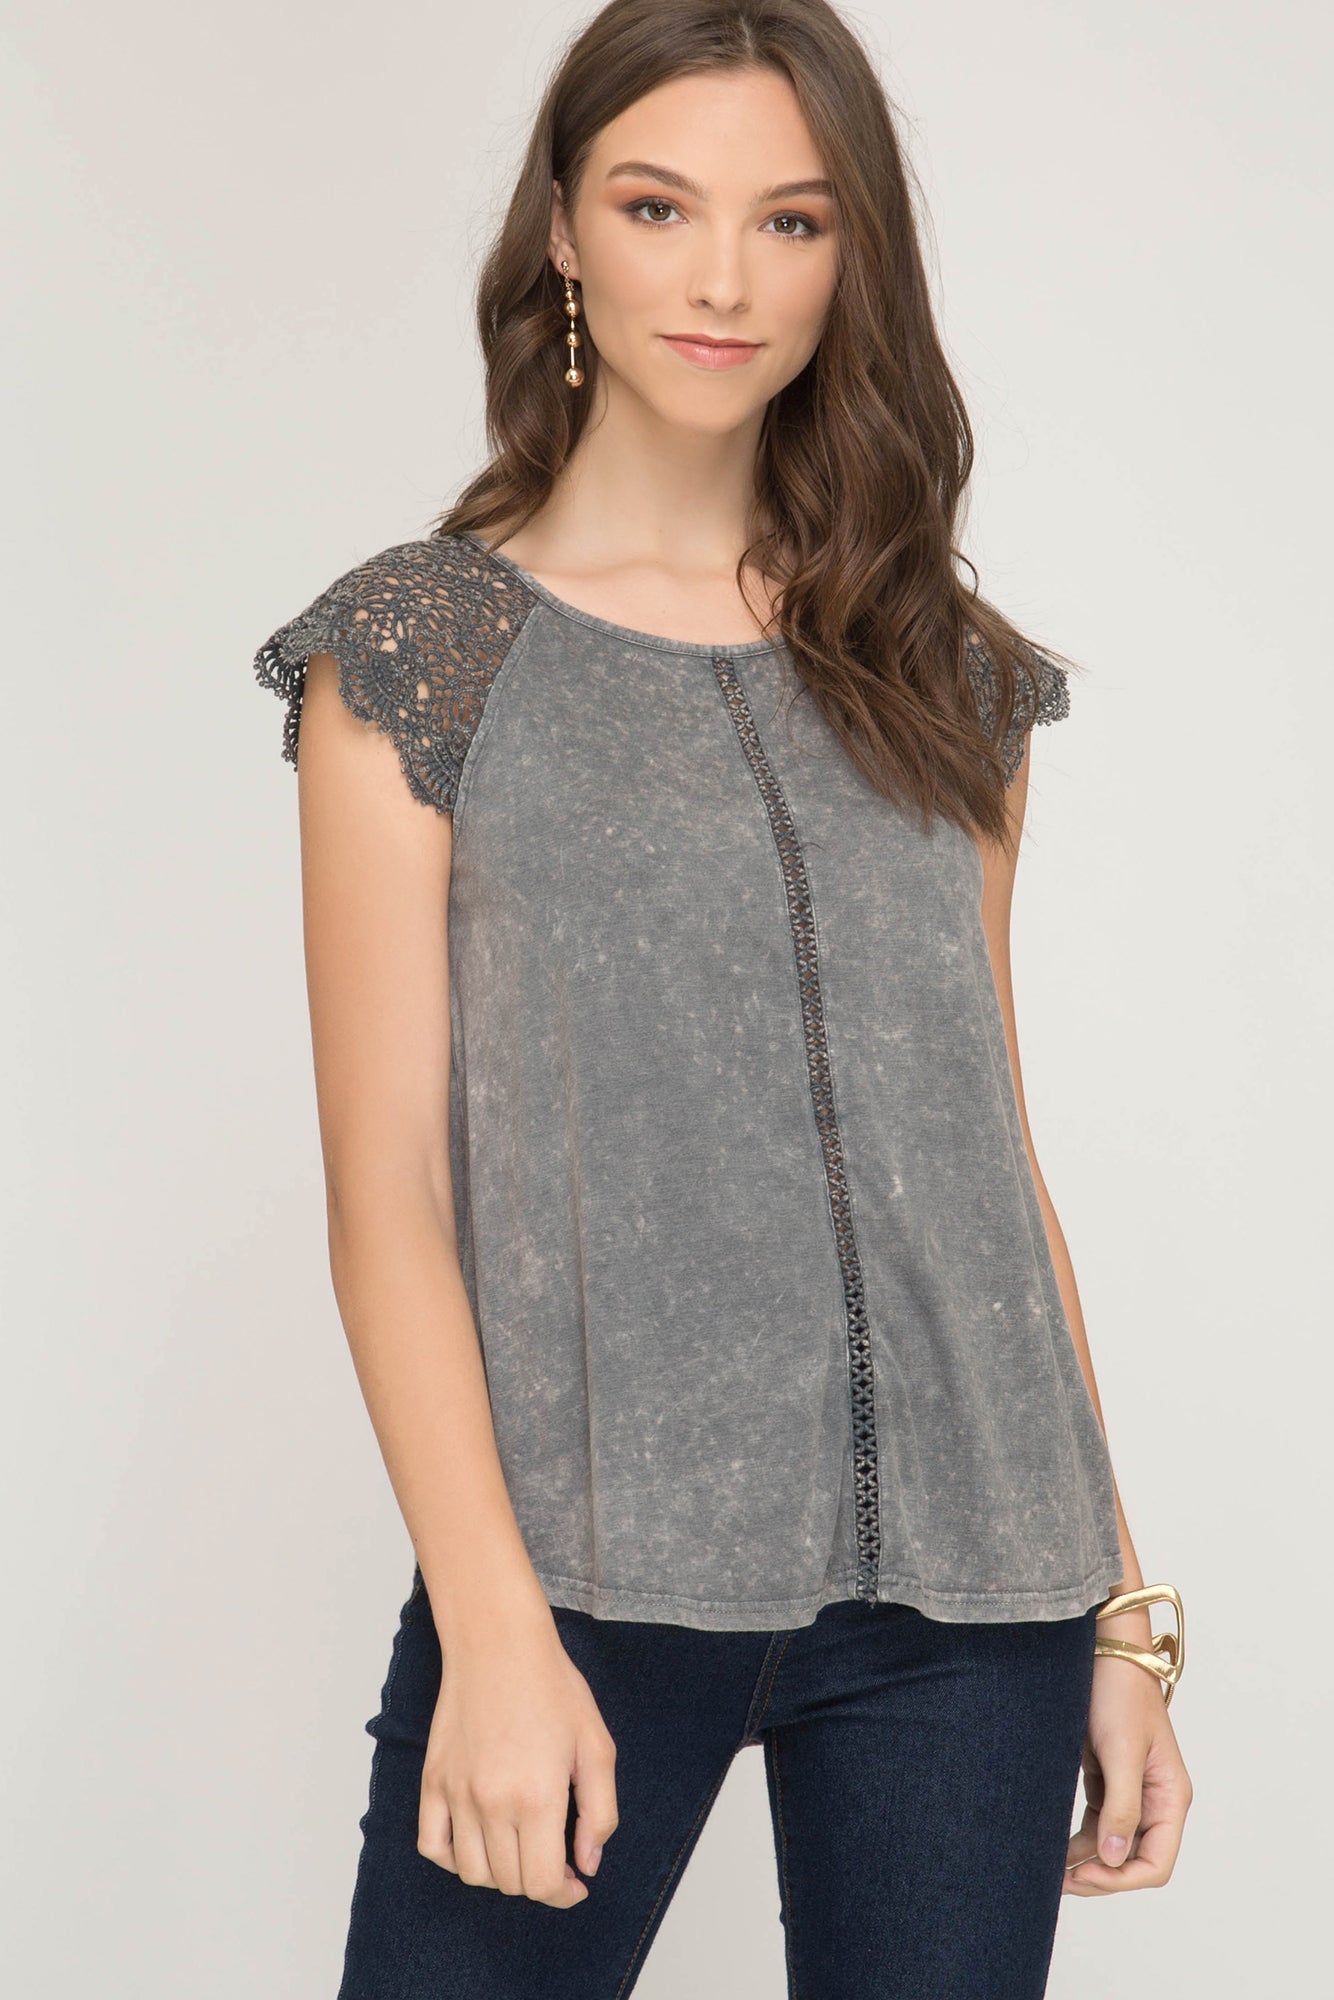 Short Sleeve Top With Contrast Sleeves!